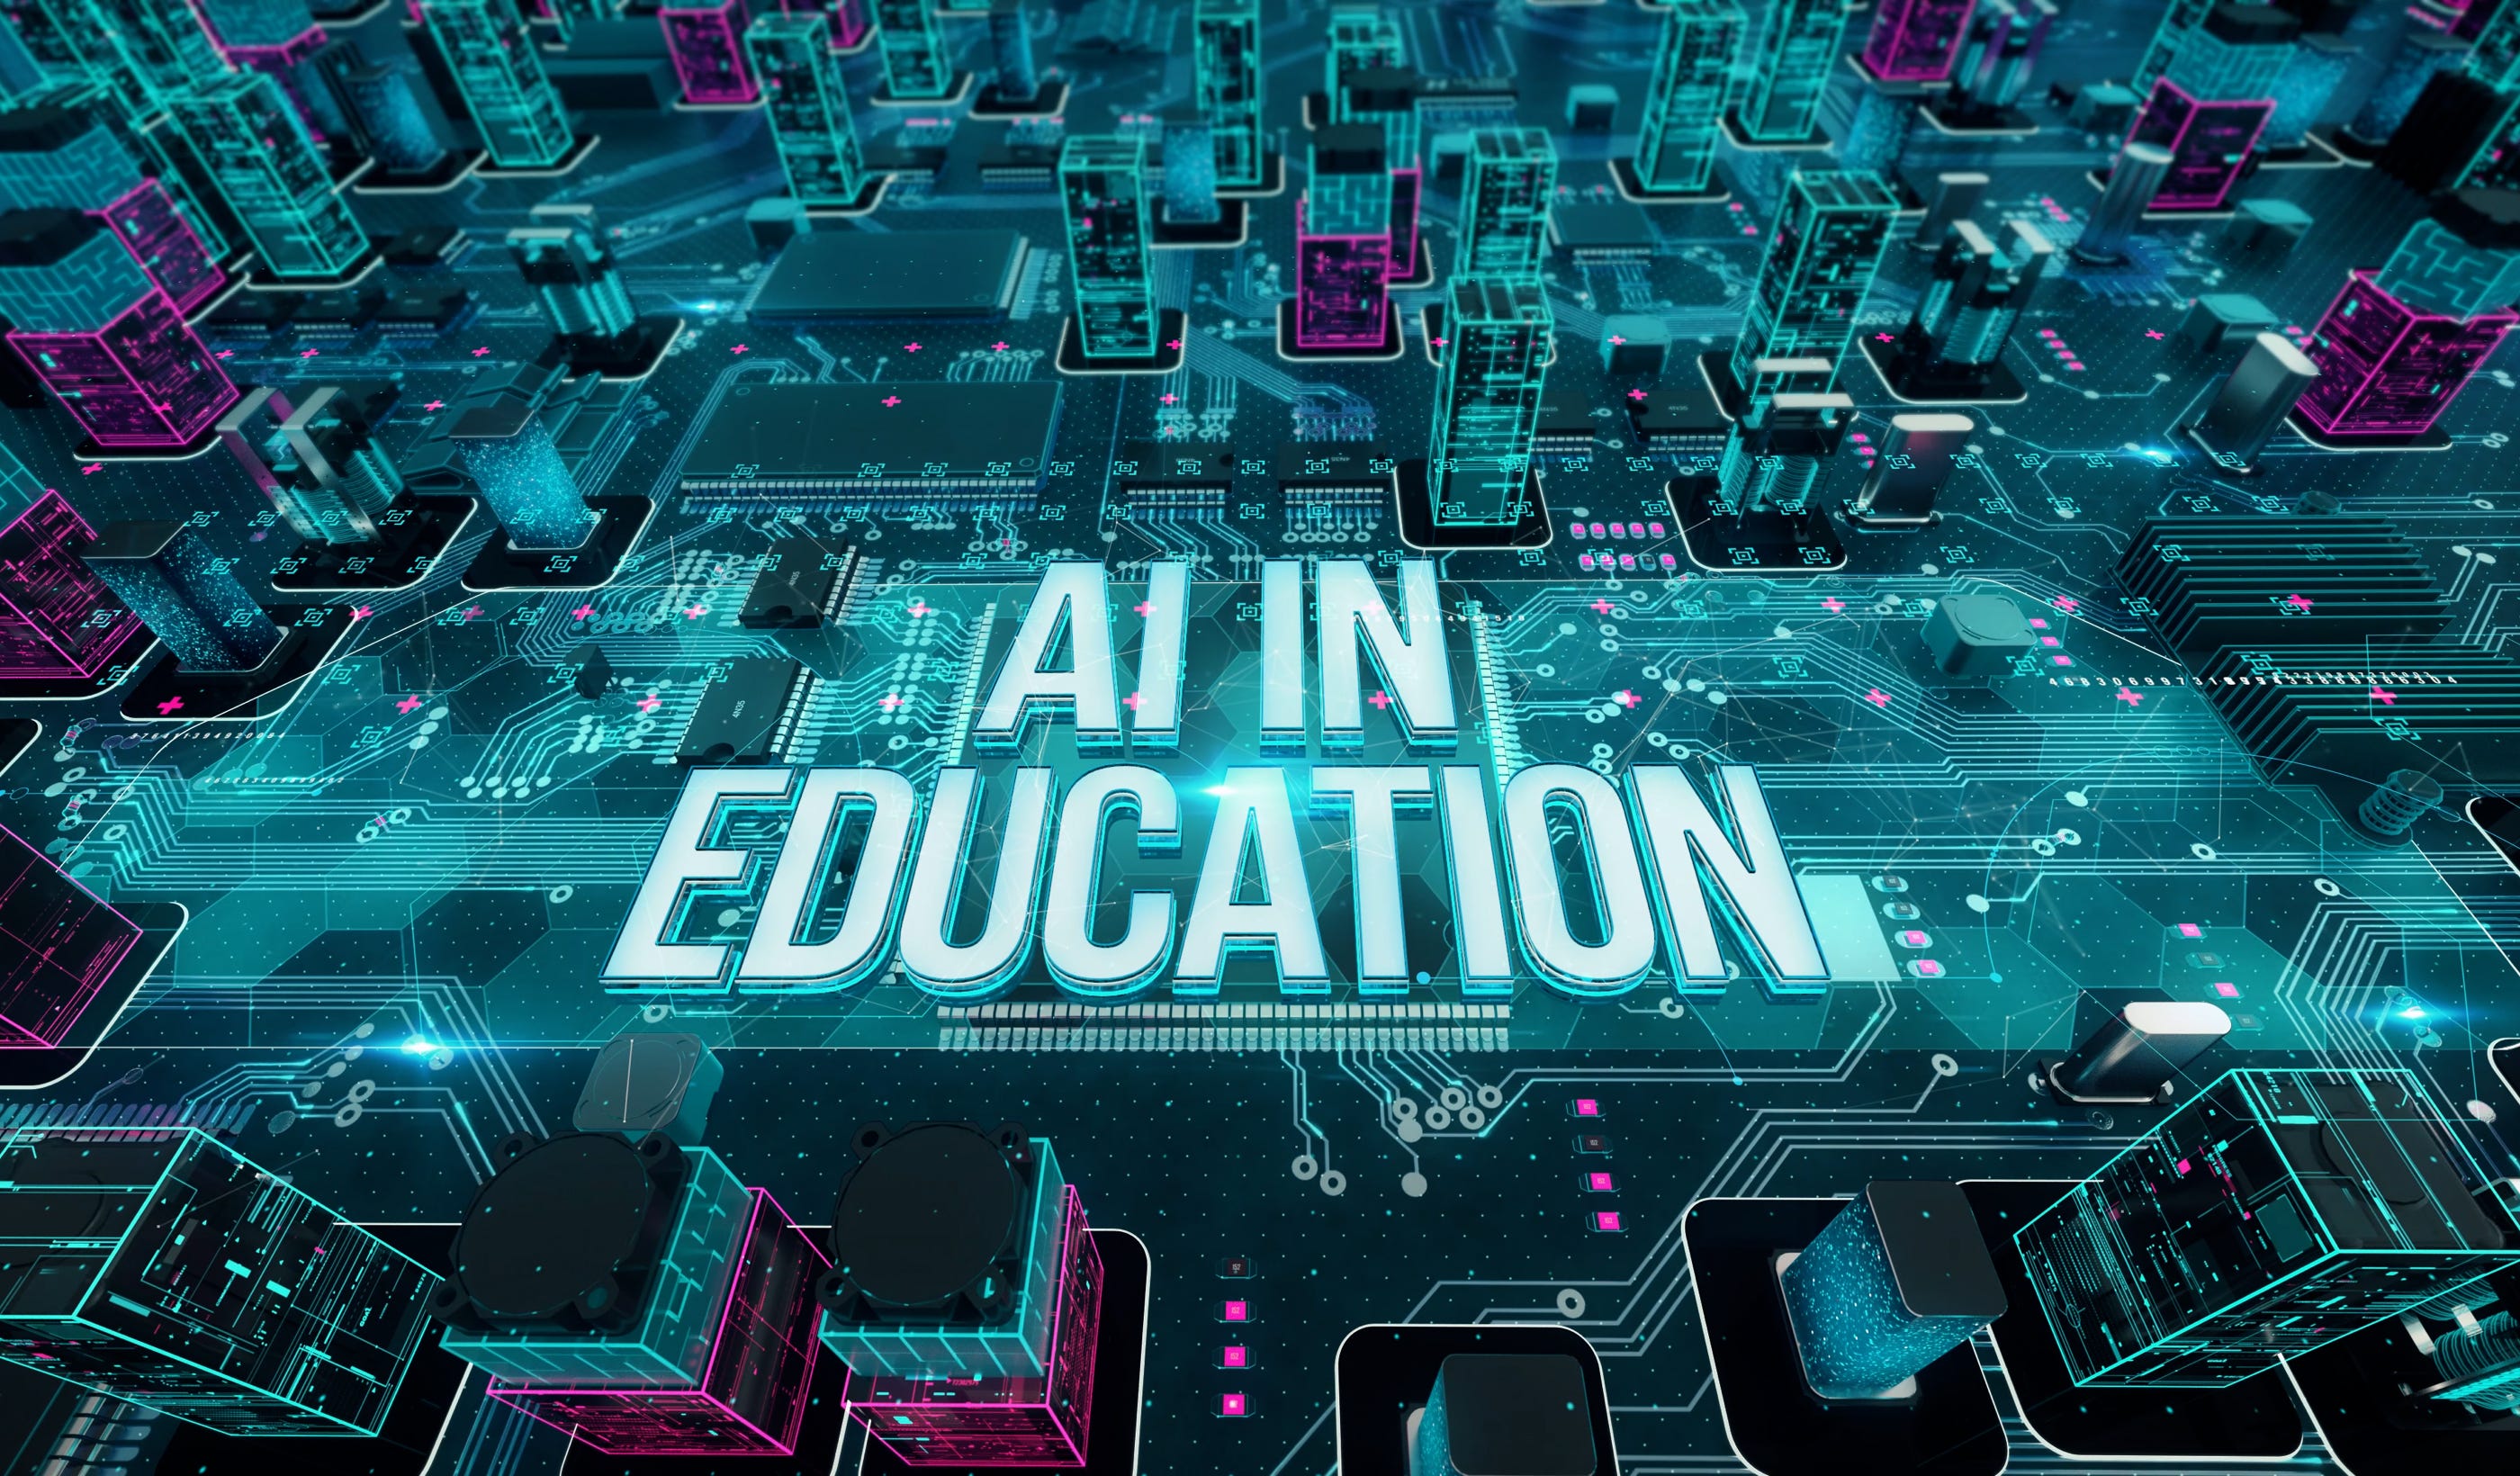 According to a recently released report by UNESCO on “Impact of AI on skill development,” AI has broad implications for the whole of humanity, including education systems that equip lifelong learners with the skills to navigate both work and society. The International Baccalaureate (IB) also emphasizes the need to adapt and transform educational programs and assessment practices to enable students to use new AI tools ethically and effectively.   At WISS, we have embarked on a transformative journey to embrace AI as a community, empowering our students to navigate an AI-integrated future in the digital age. In the context of developing ATL (Approaches to Learning) skills in students within the Diploma Programme, these are fundamental in helping students achieve their full potential. By developing these skills, students gain confidence, versatility, and resilience when approaching demanding content.   Across the Diploma program, one of the common important assessment expectations is to develop a focused research question or a knowledge question that allows for an in-depth investigation or inquiry. This involves strong research to delve into unbiased, factual information, application of justified knowledge, weighing out diverse perspectives, analyzing and evaluating them objectively and subjectively, and presenting findings in an academically acceptable manner that is devoid of plagiarism.   In my Physics classroom, students are building on research questions for their upcoming investigative analysis for their IA. One student who found it challenging to come up with an area of investigation was asked to identify his area of passion. Having identified baseball, the student was guided to use AI to get to his research question. The student gave the prompt “Google prompts to investigate experiments on baseball,” and the AI tool generated a list of areas that could be investigated experimentally. Delving further, the student could find out relevant academic papers and the citation needed with the same.    The use of AI demands a paradigm shift in the way students think, conduct research, and communicate. Furthermore, as a cohort, DP students will be learning how to create argumentative, analytical, or evaluative pieces of writing for TOK and other subject areas using AI and, at the same time, generate academically honest work by citing work generated by AI as per IB guidelines.    It’s important to note that while AI platforms offer unique benefits, they should not replace human interaction in research or skill development. Embracing our humanity and learning to connect human-to-human remains crucial for personal and professional advancement. As a community at WISS, we would continue embracing innovative methods of teaching and learning that empower our students to be creators and not imitators in ways that would ignite their passion and sense of inquiry.  